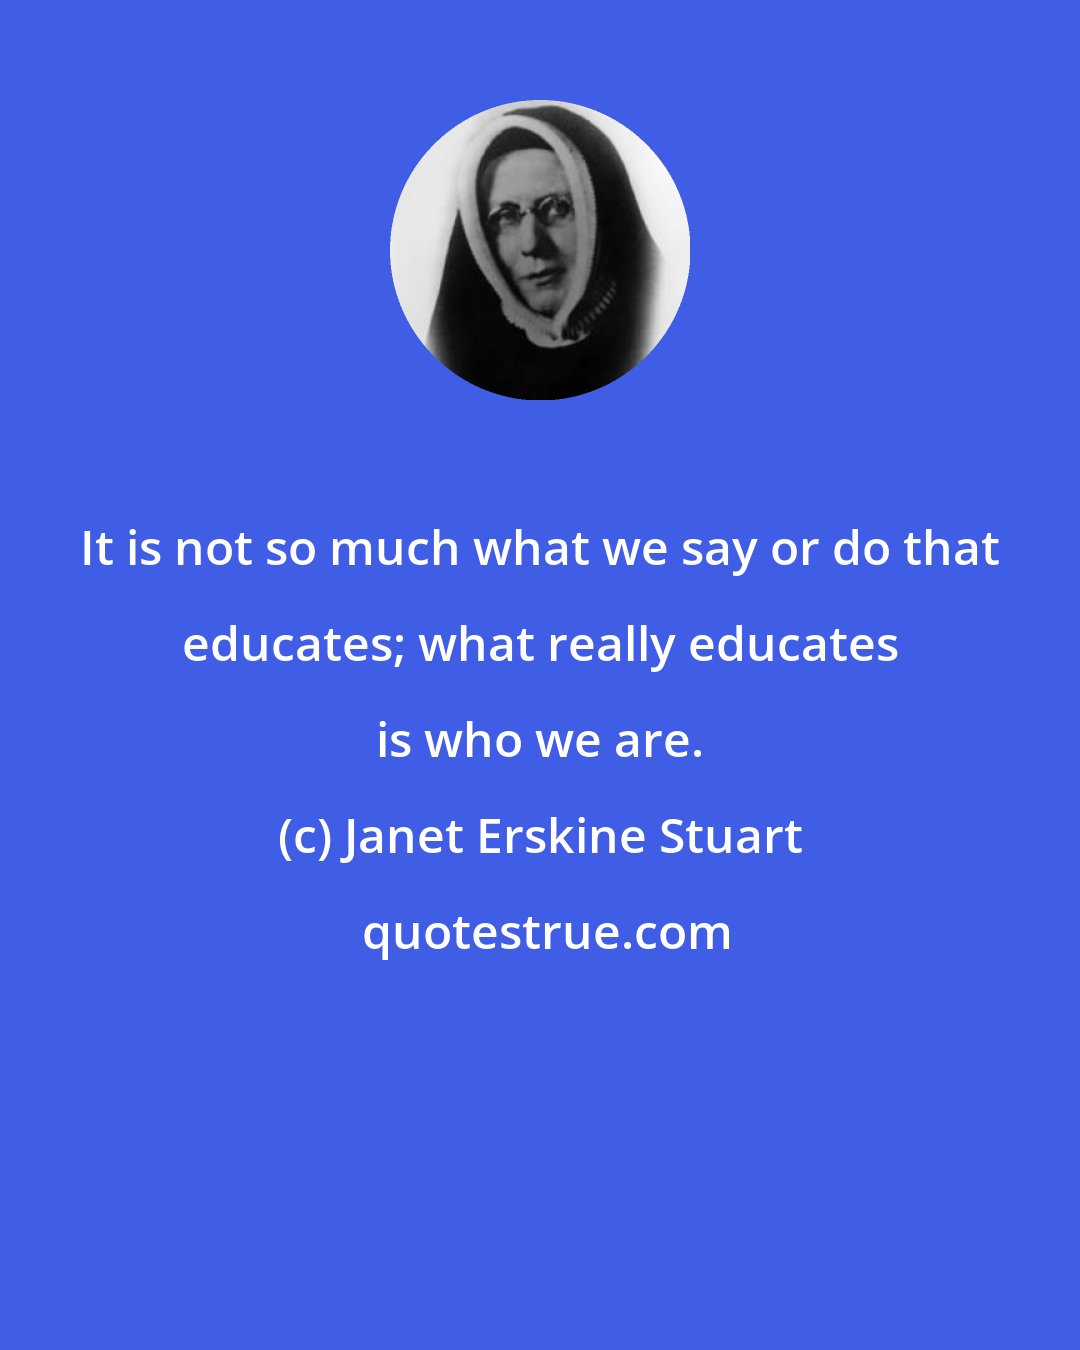 Janet Erskine Stuart: It is not so much what we say or do that educates; what really educates is who we are.